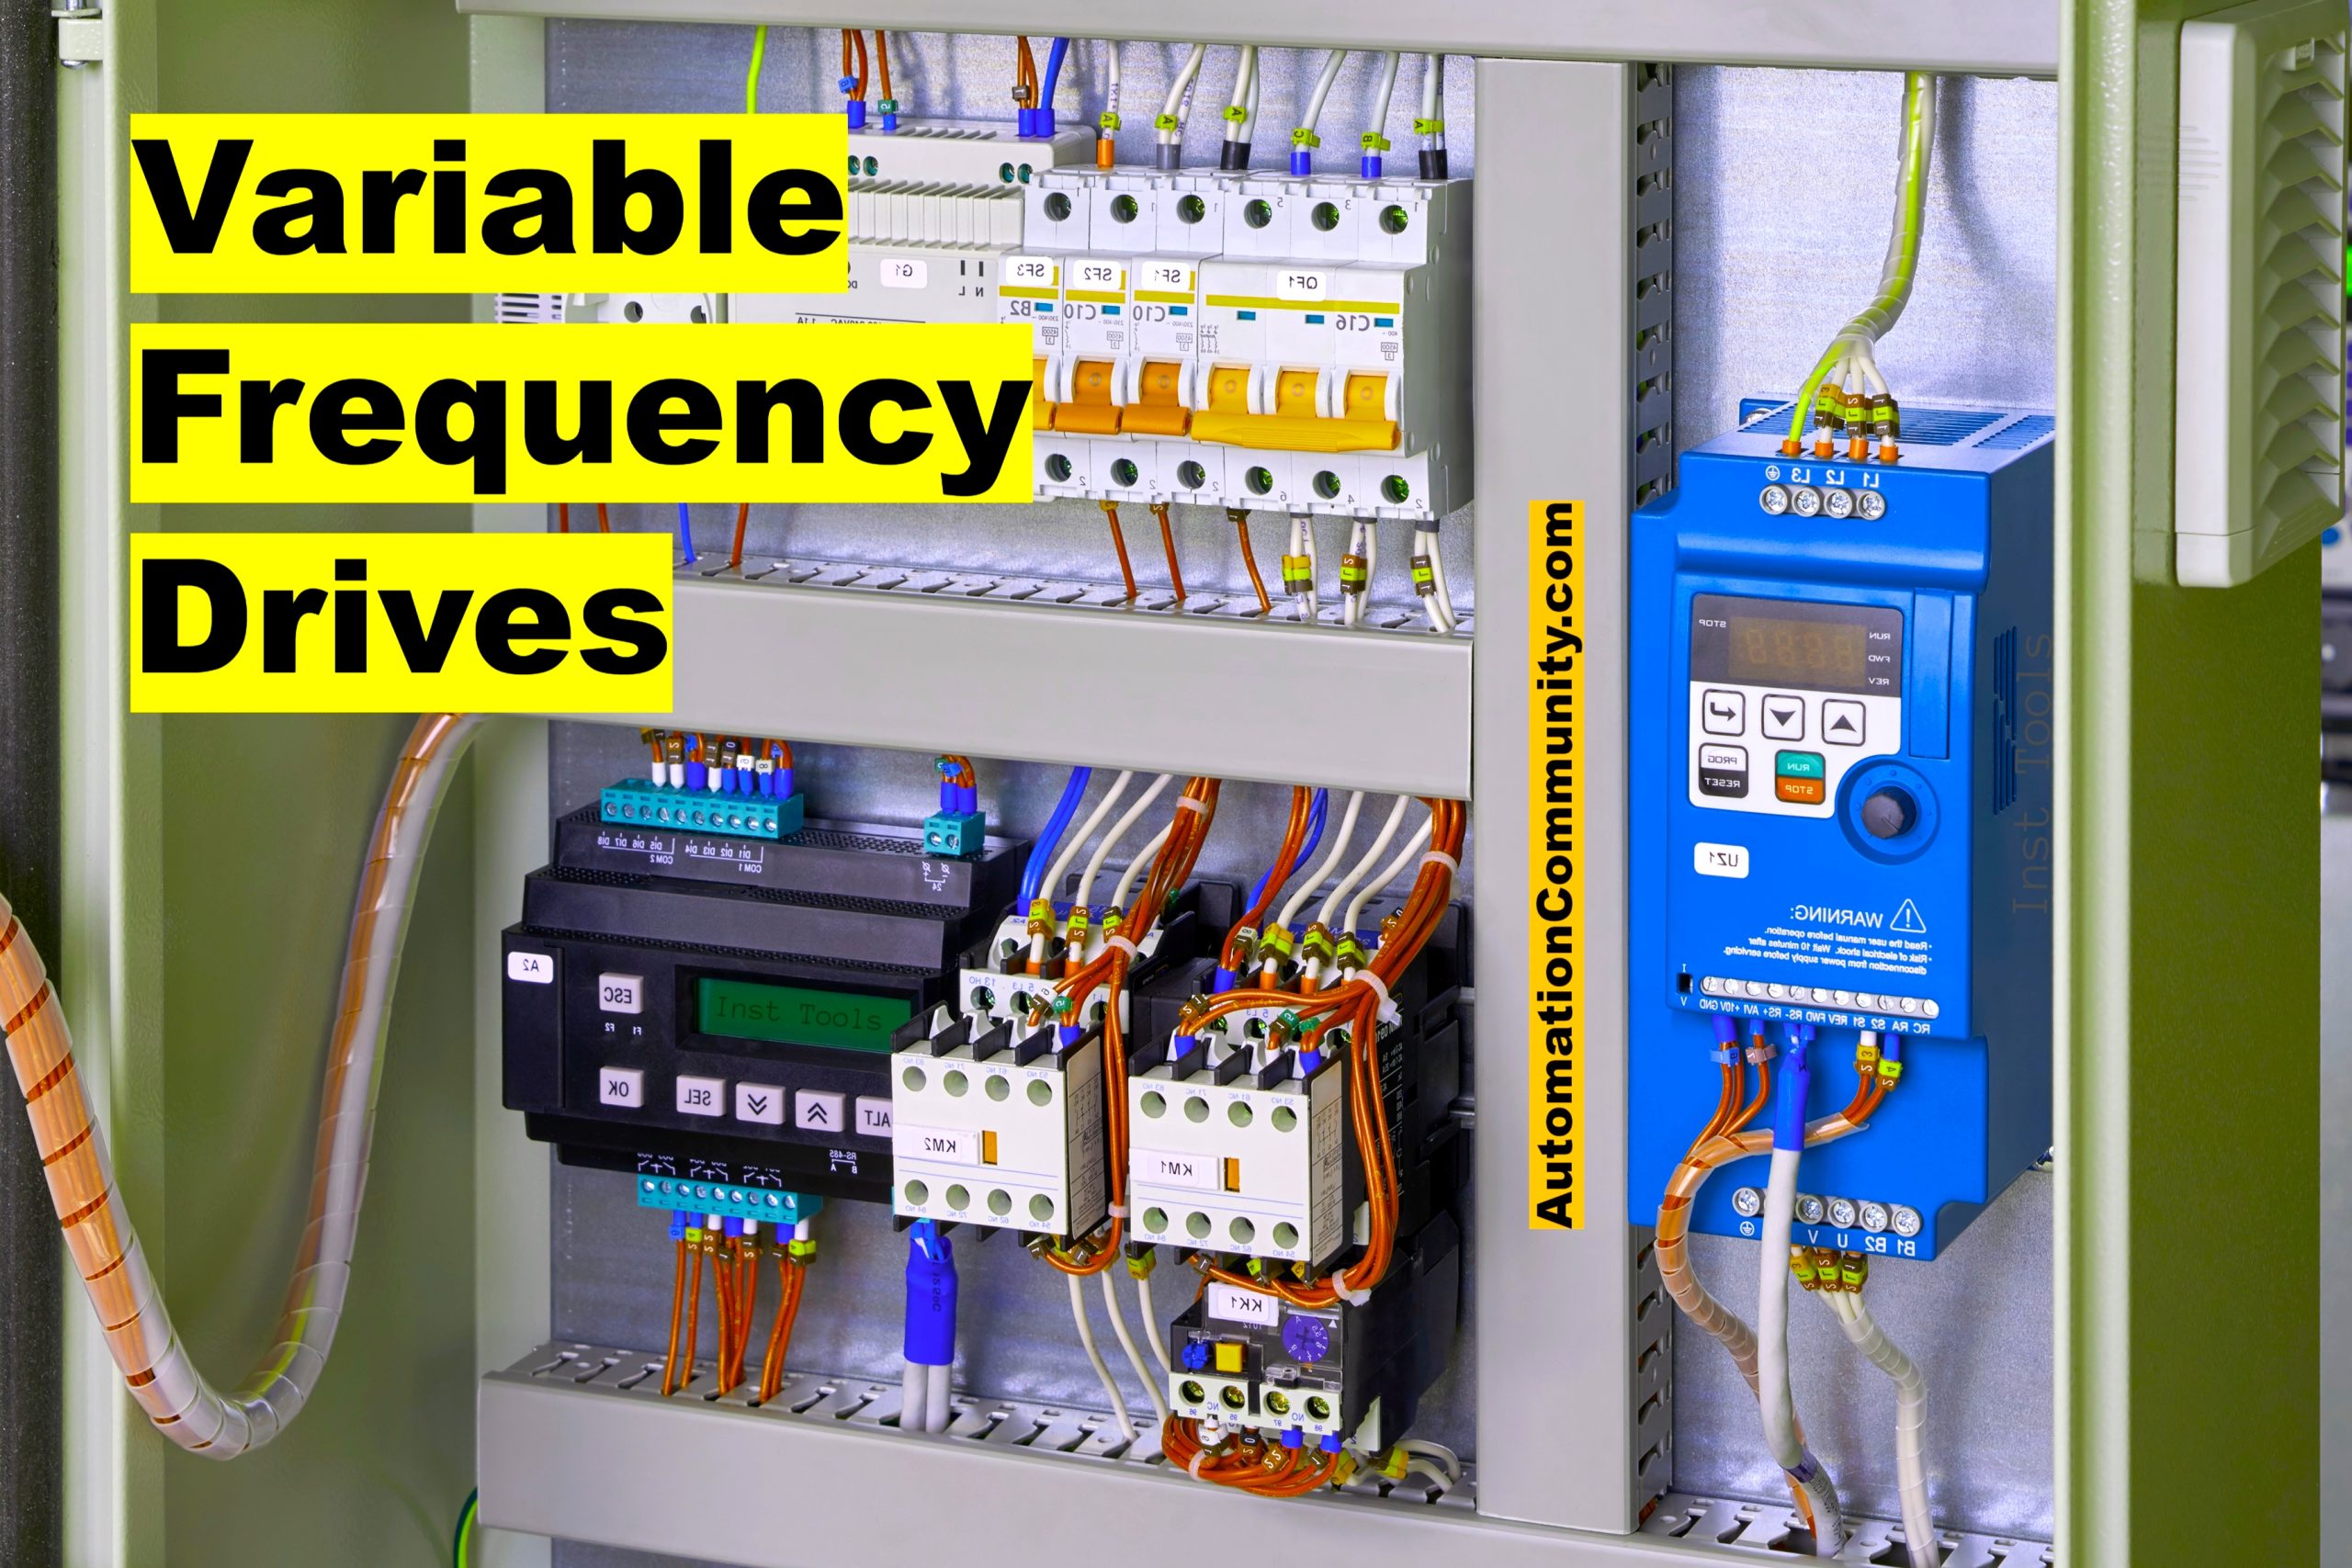 VFD Multiple Choice Questions – Variable Frequency Drives